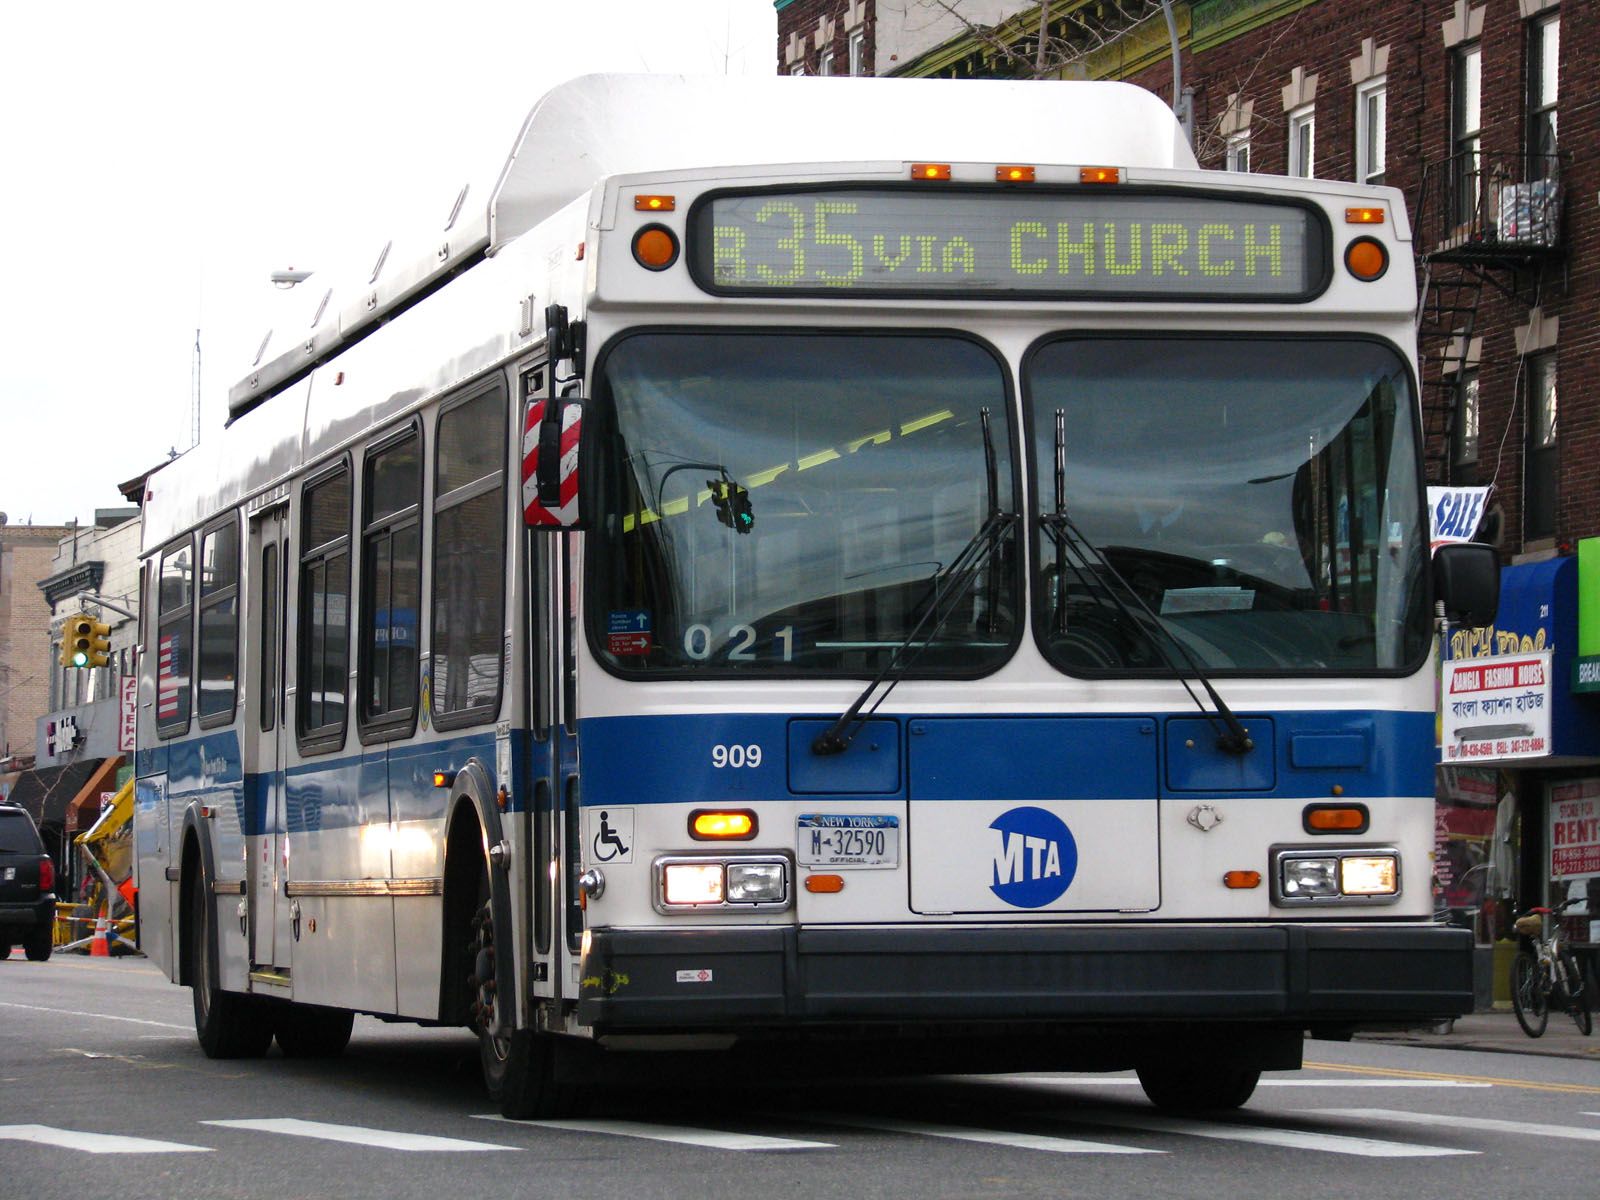 Route Change to the B35 Bus Starts Today